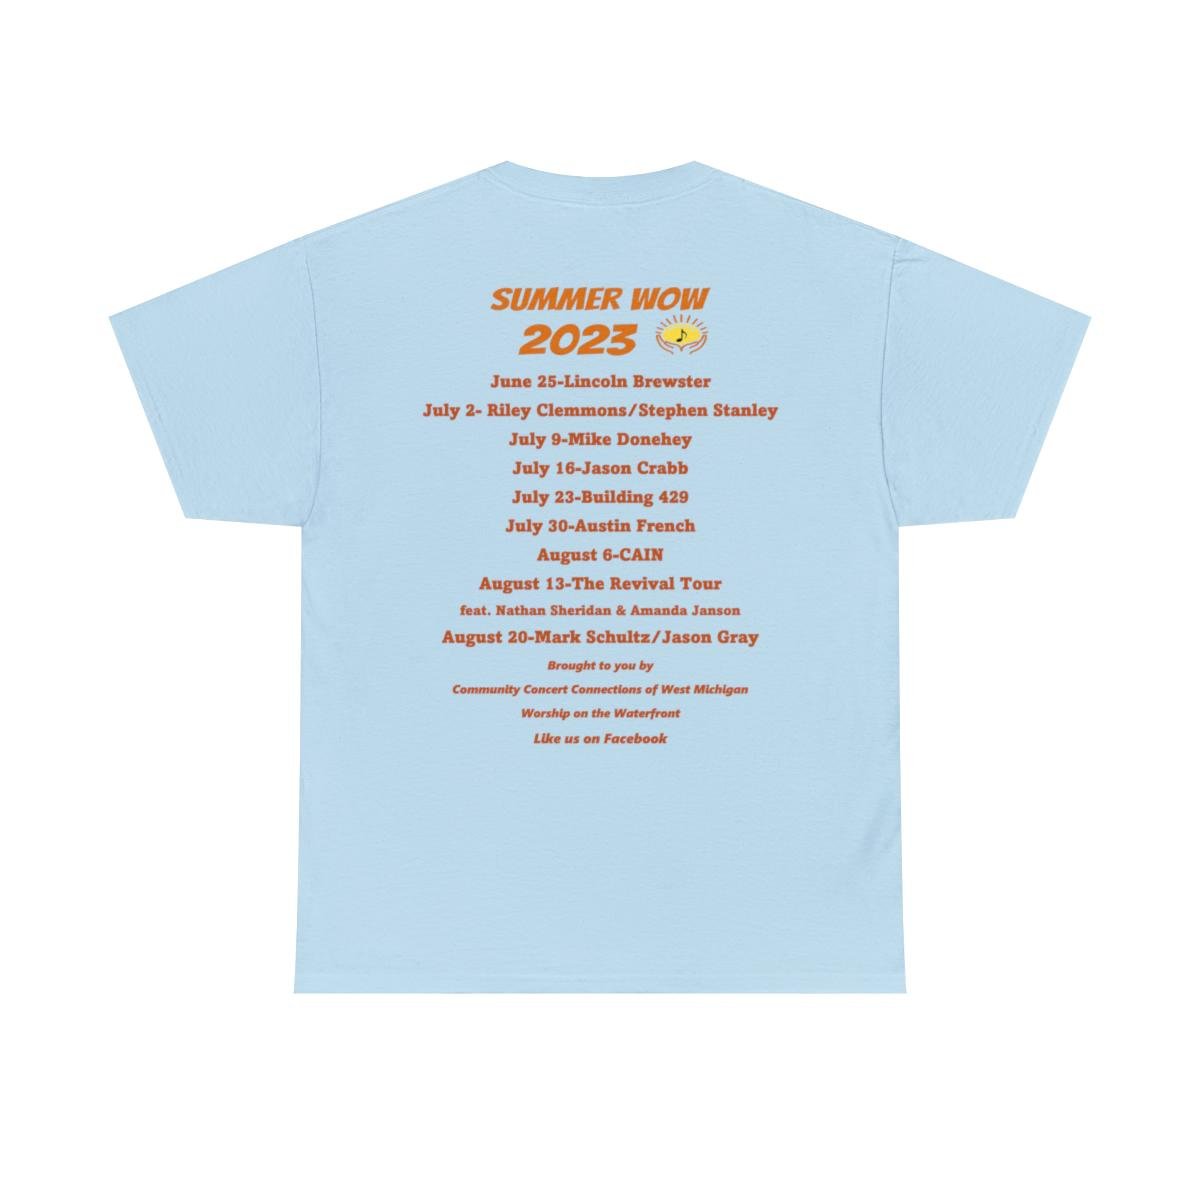 Worship On The Waterfront – Summer WOW 2023 Short Sleeve Tshirt